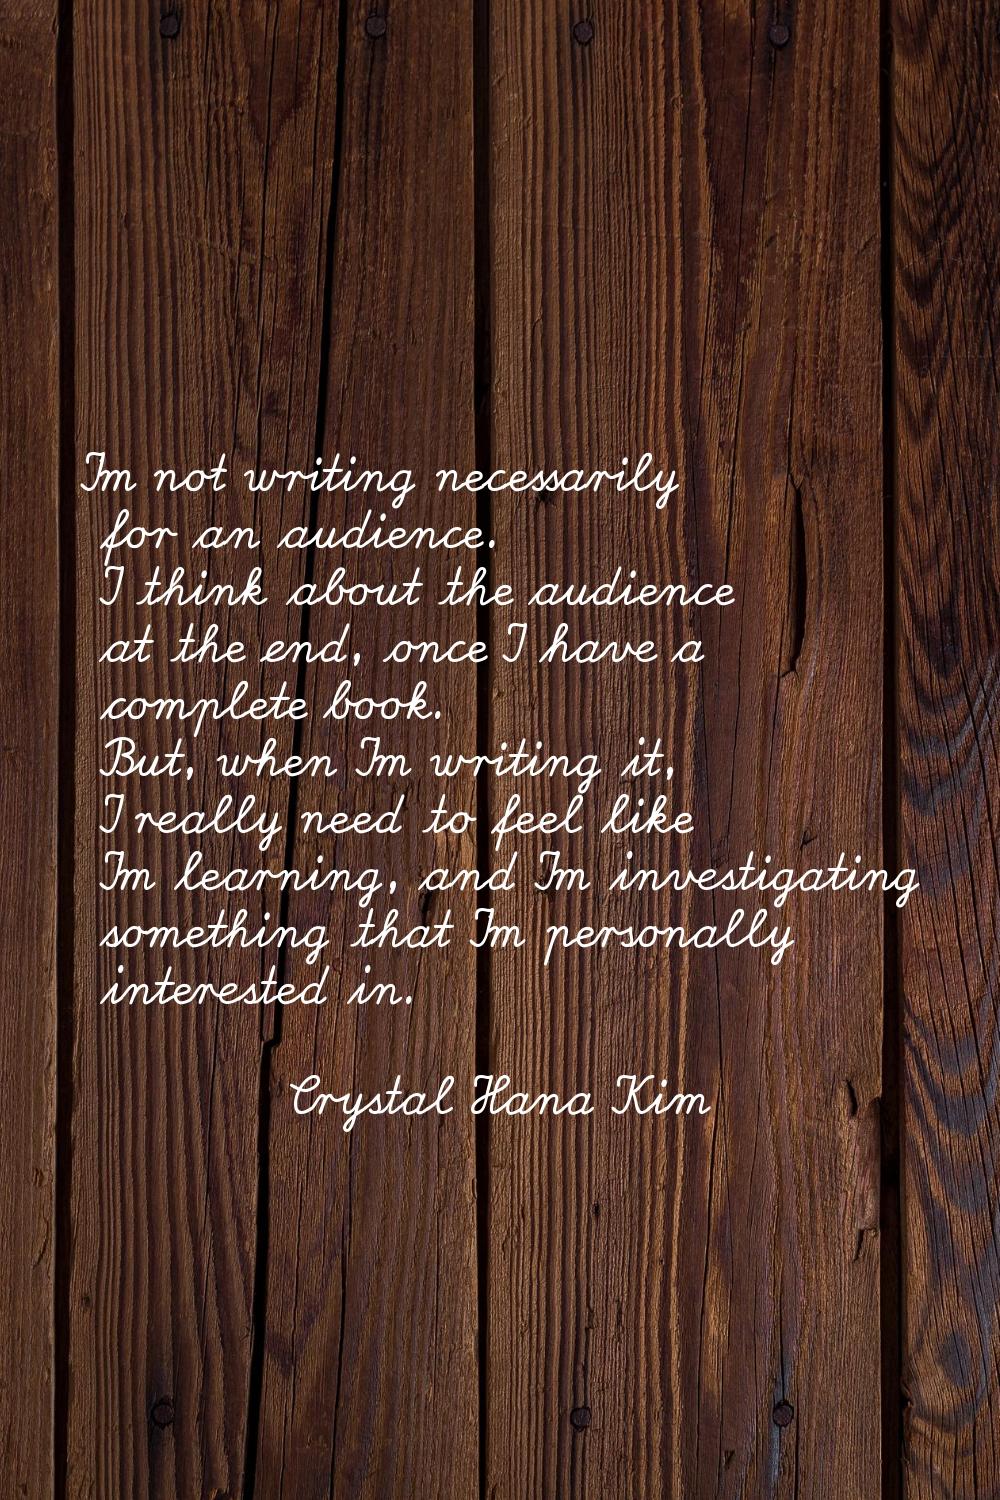 I'm not writing necessarily for an audience. I think about the audience at the end, once I have a c